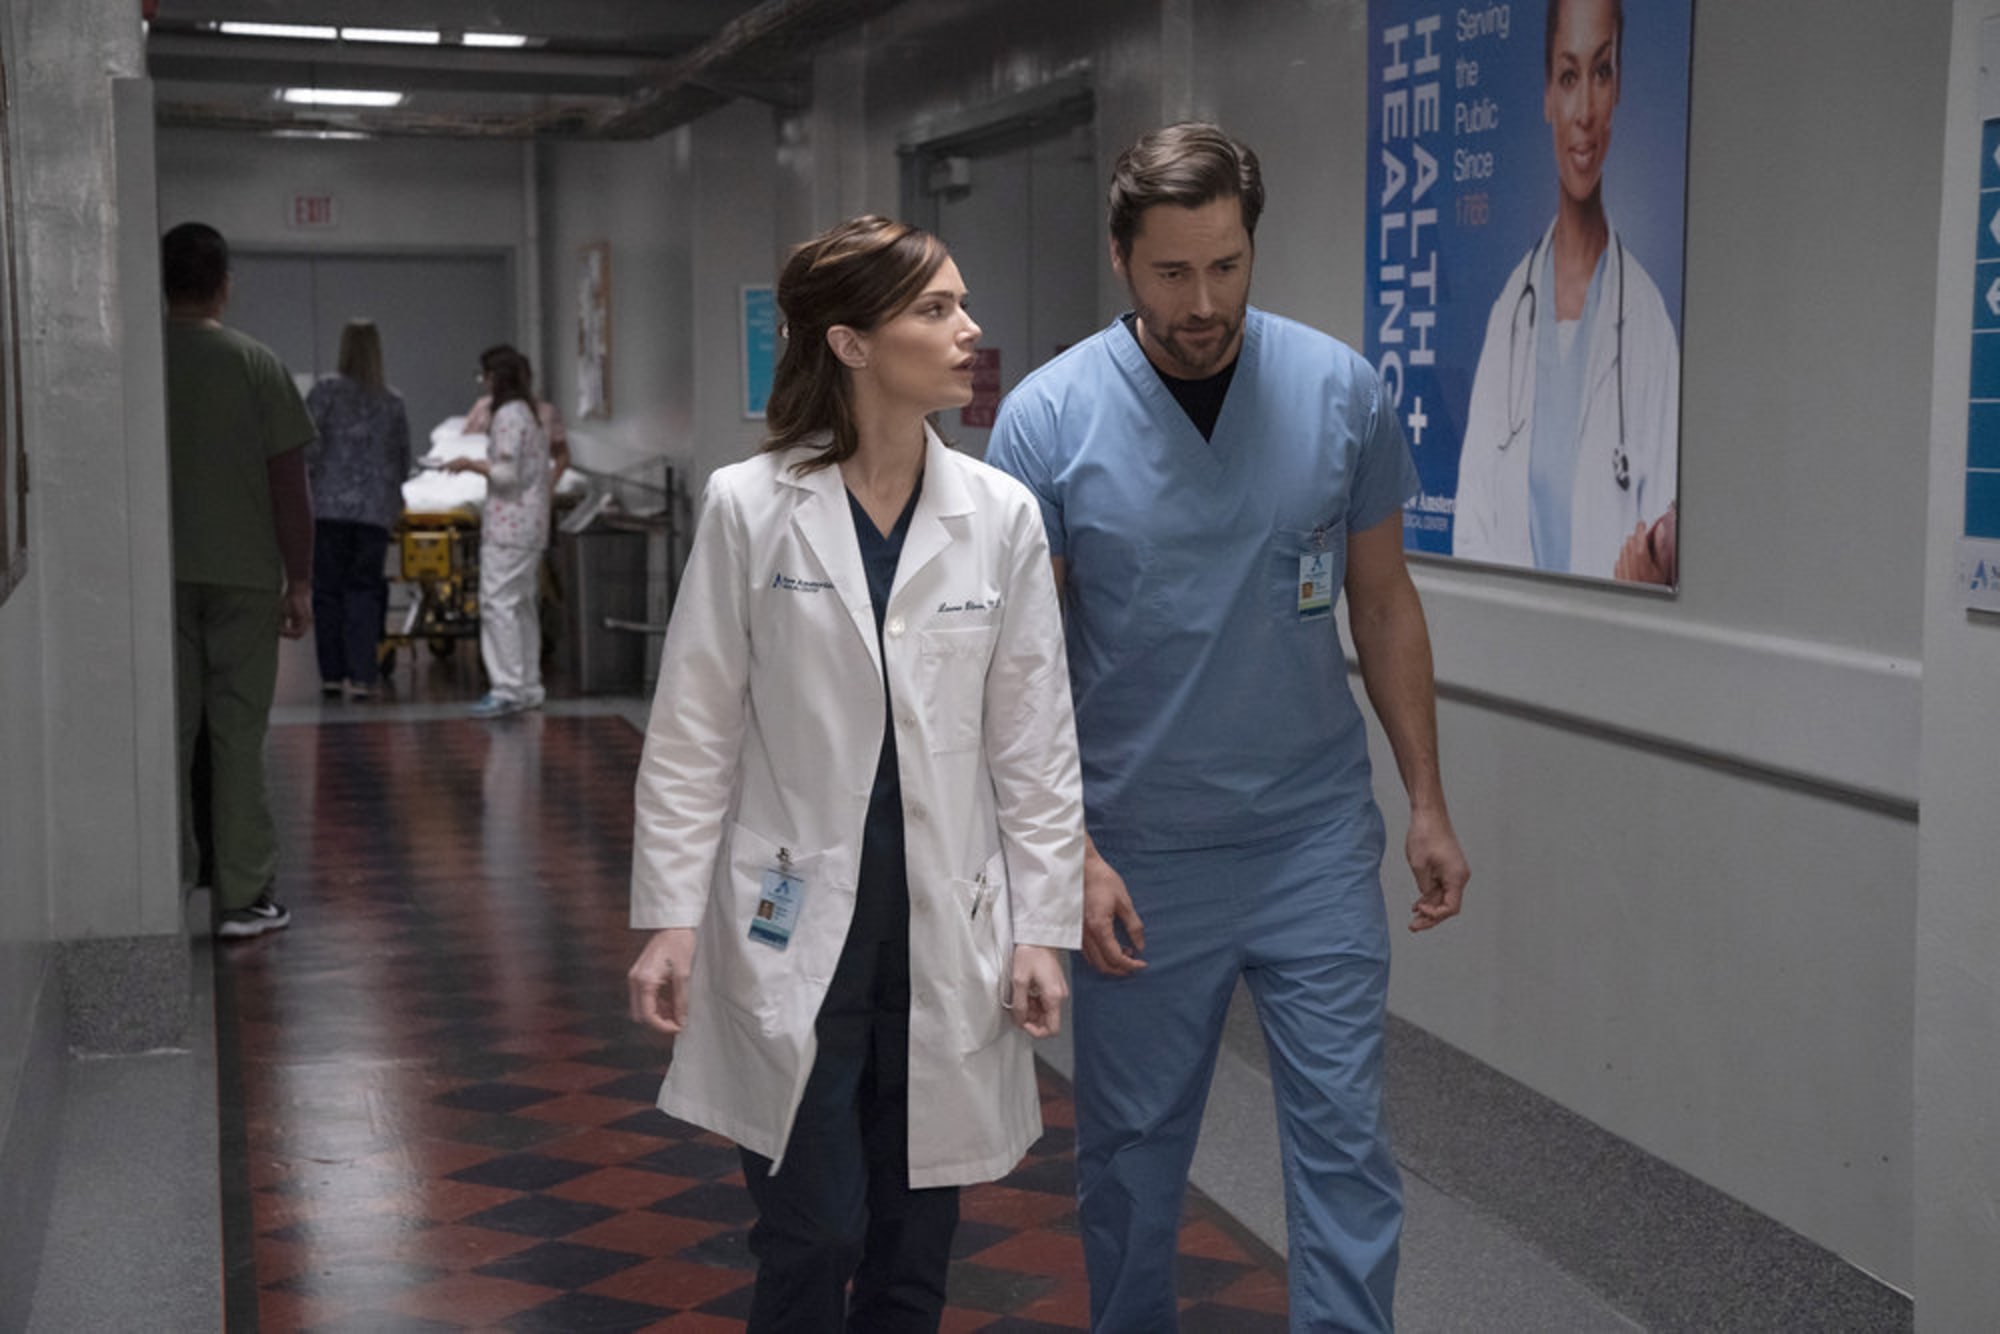 New Amsterdam Season 2, Episode 15: How to watch, what to expect - New Amsterdam Season 2 How Many Episodes